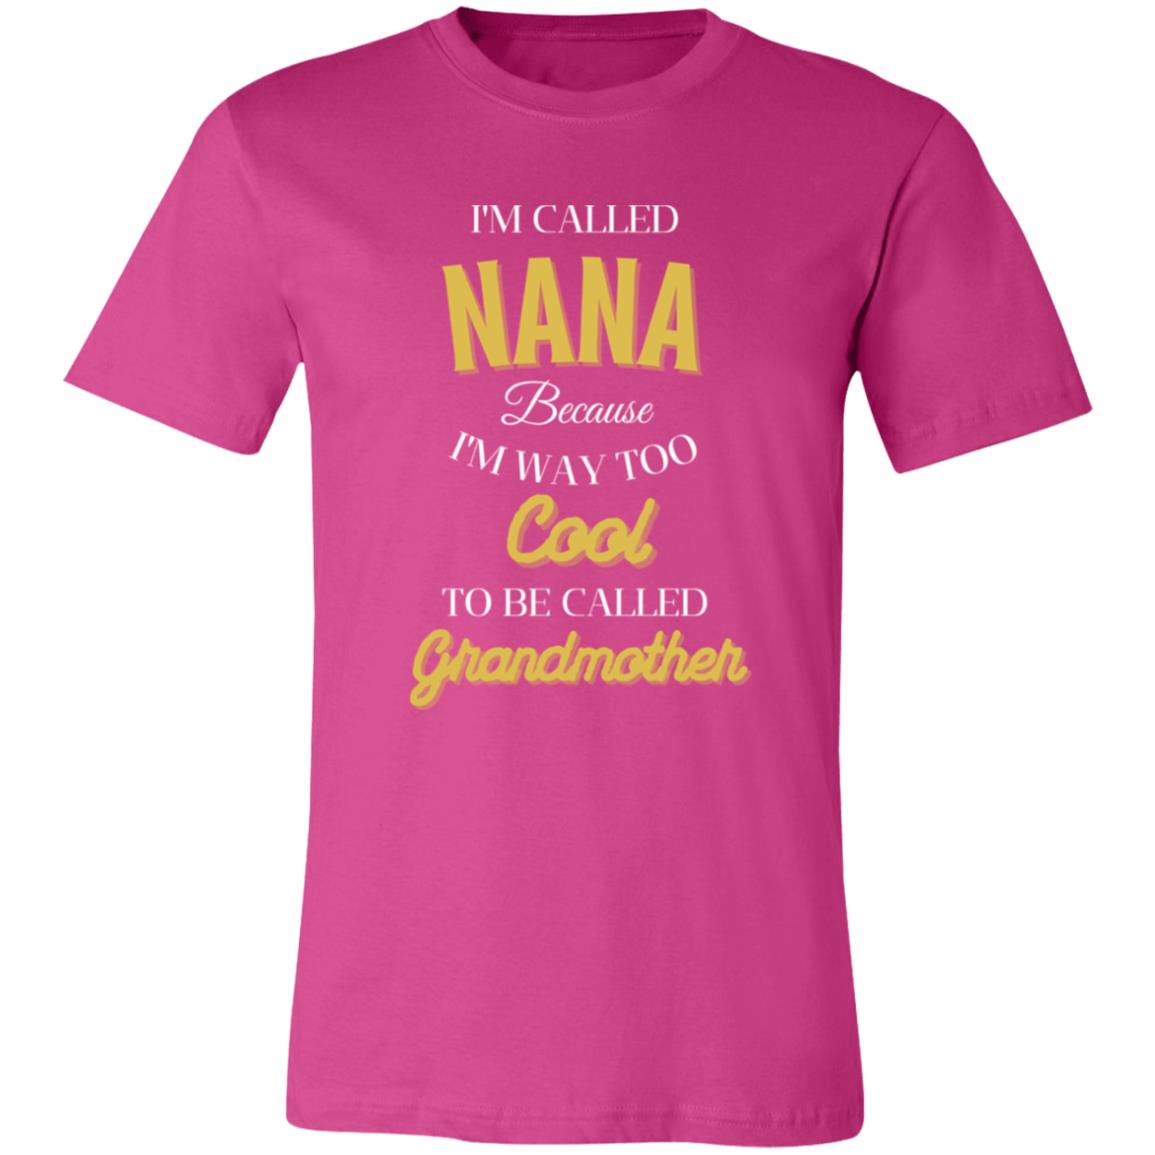 TO COOL TO BE CALLED GRANDMOTHER -Jersey Short-Sleeve Shirt